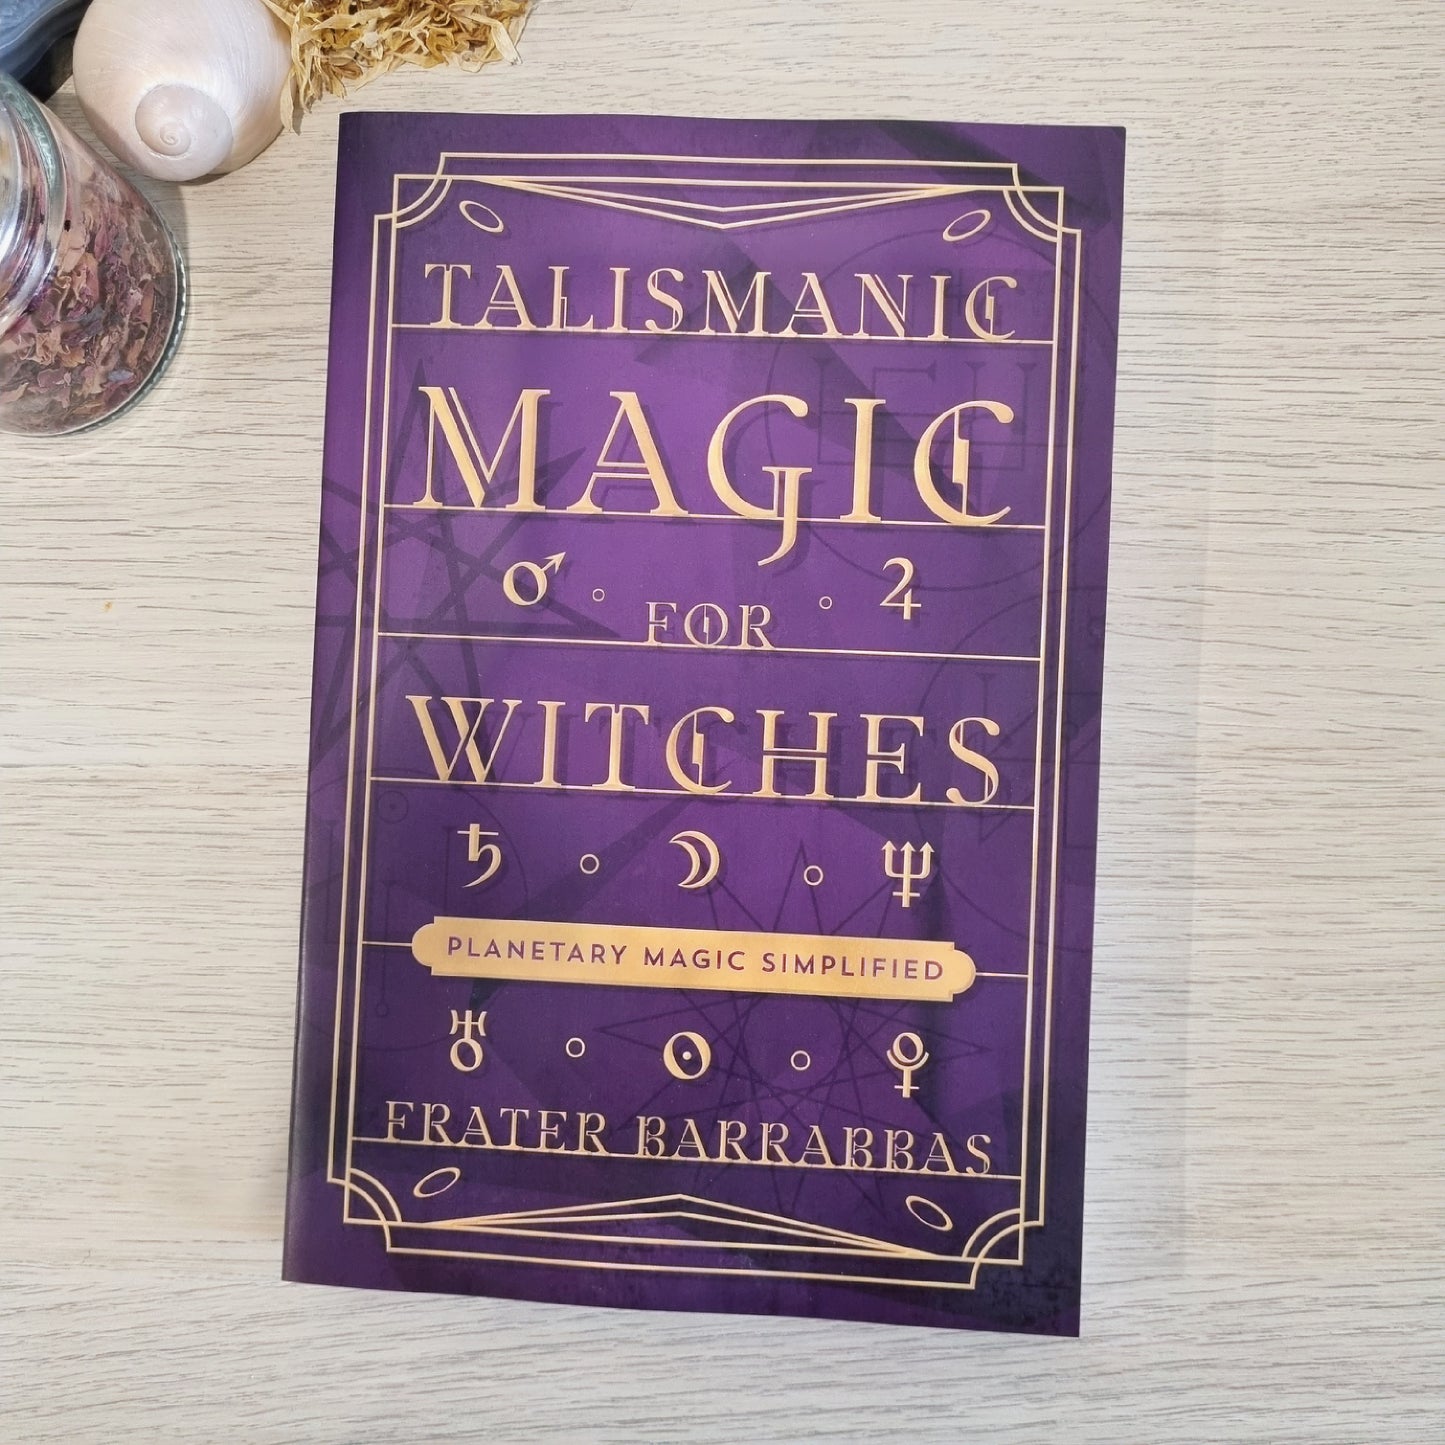 Talismanic Magic For Witches